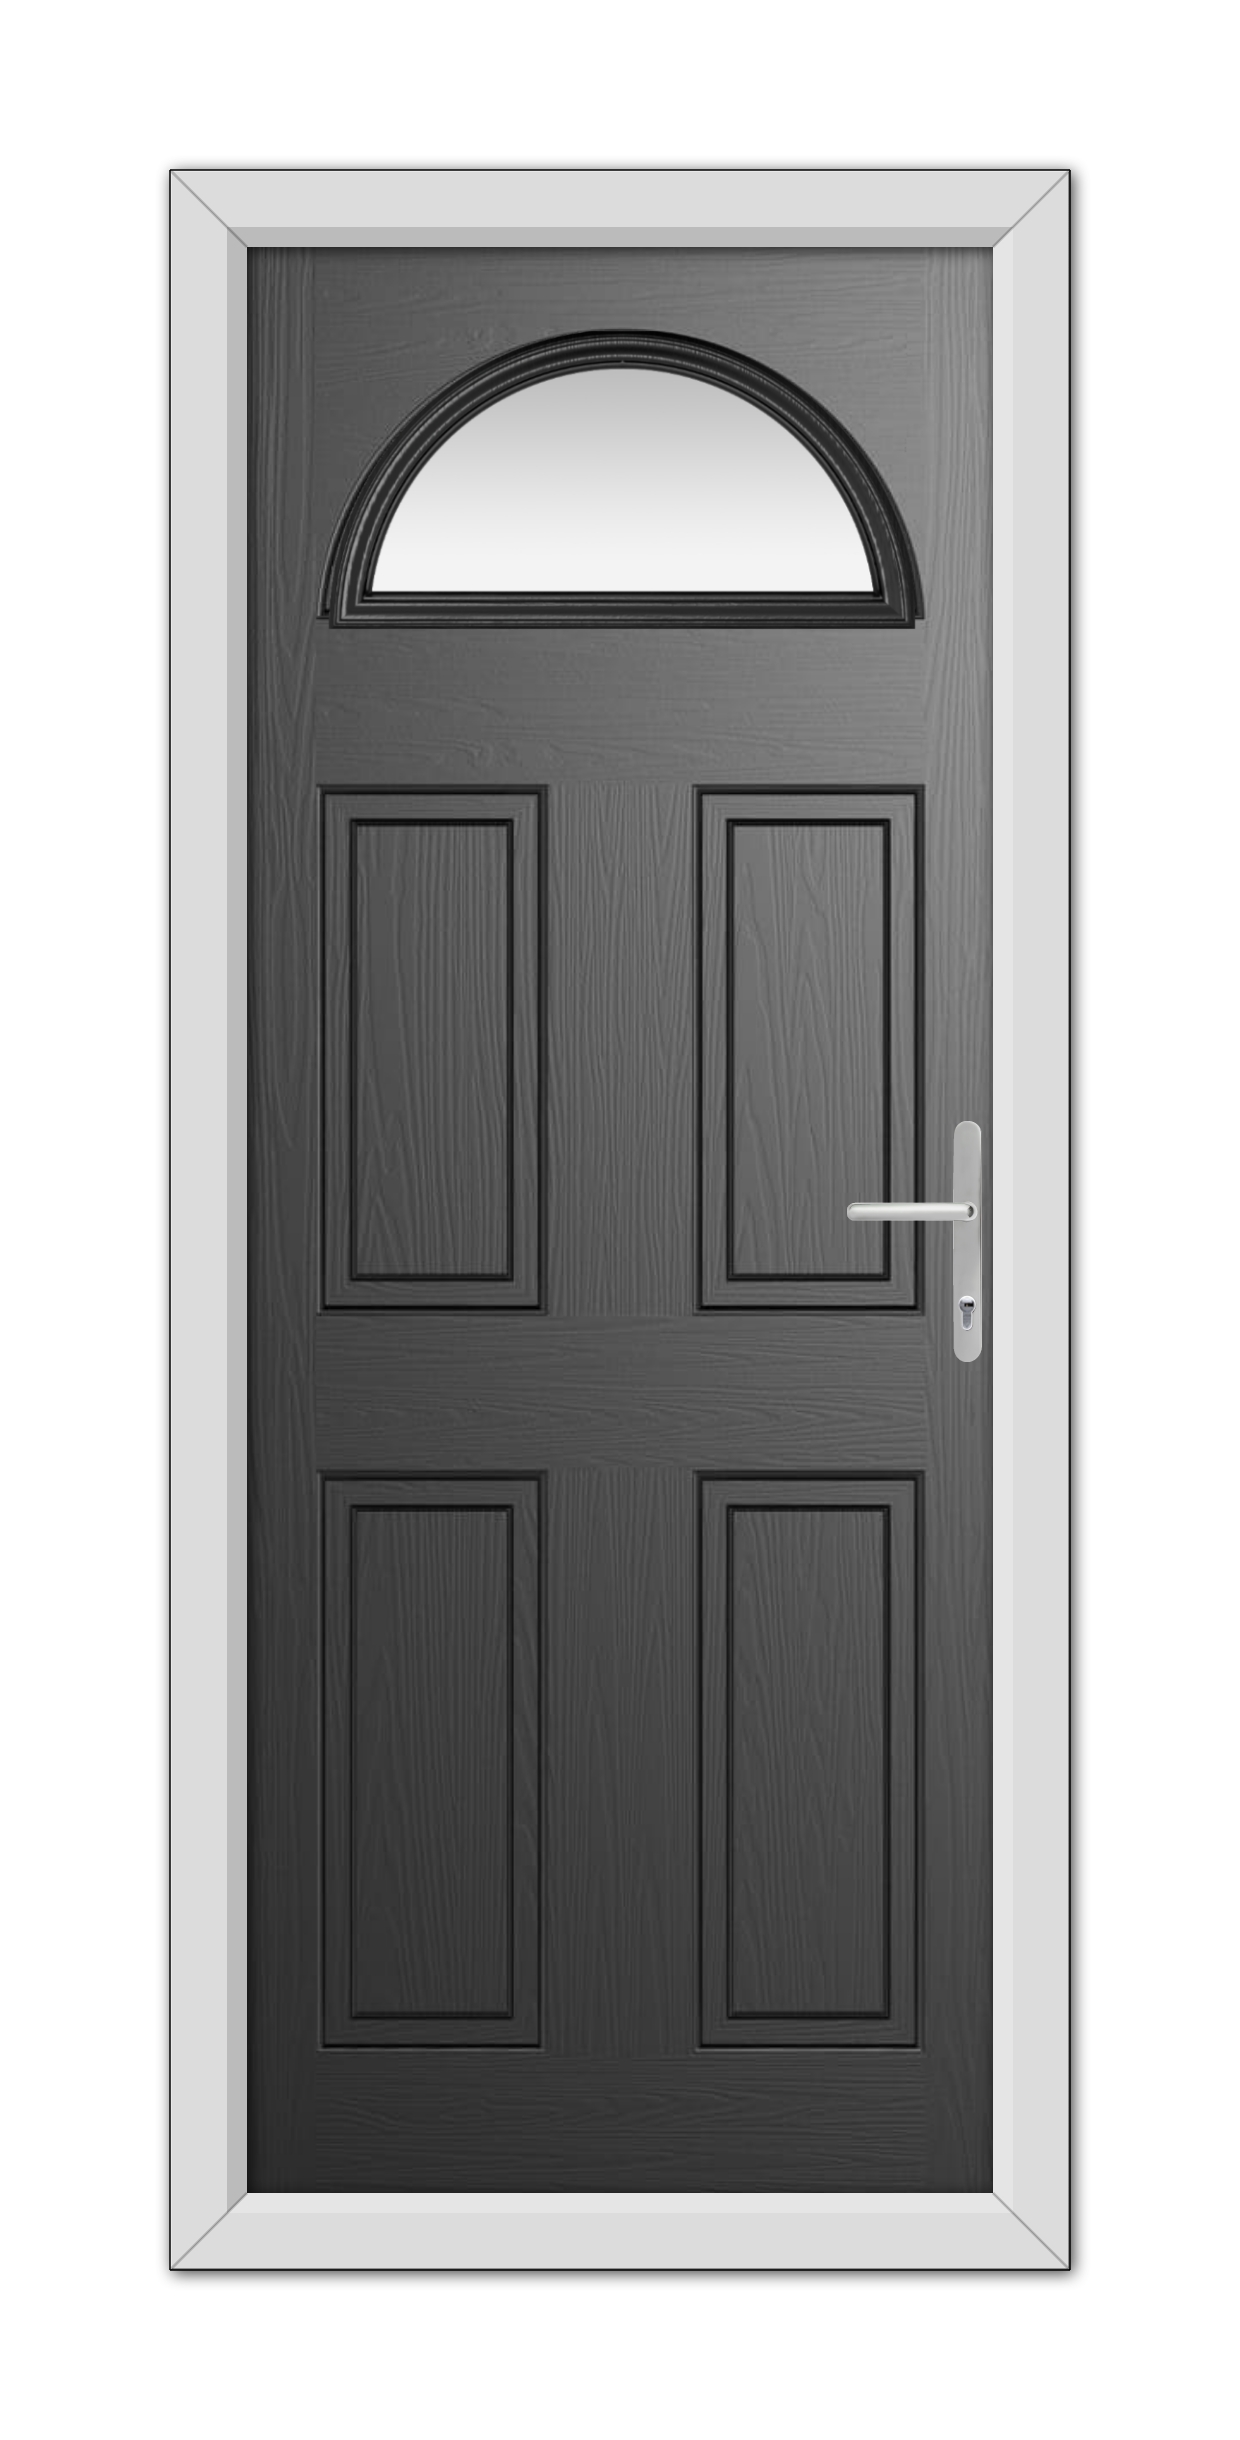 A modern Black Winslow 1 Composite Door 48mm Timber Core with six panels and a silver handle, set in a white frame with a semicircular window at the top.